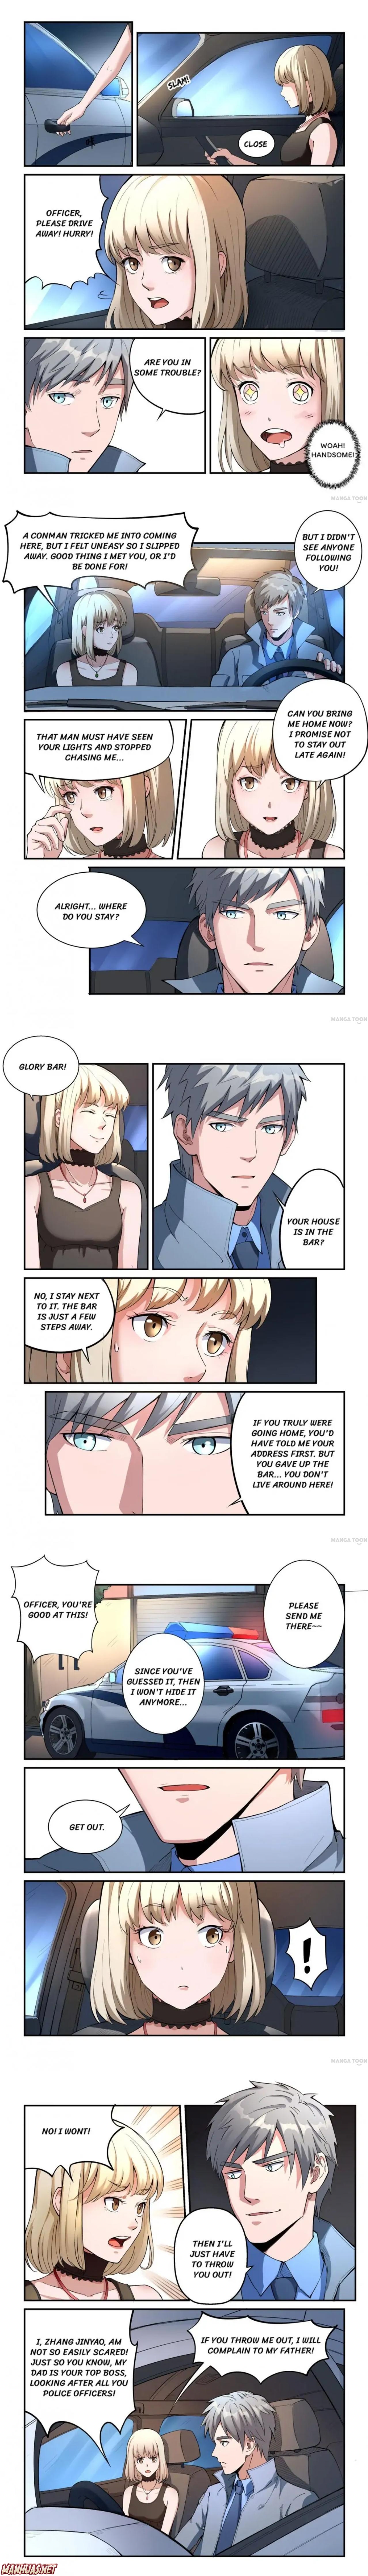 Ace Agent - Page 1